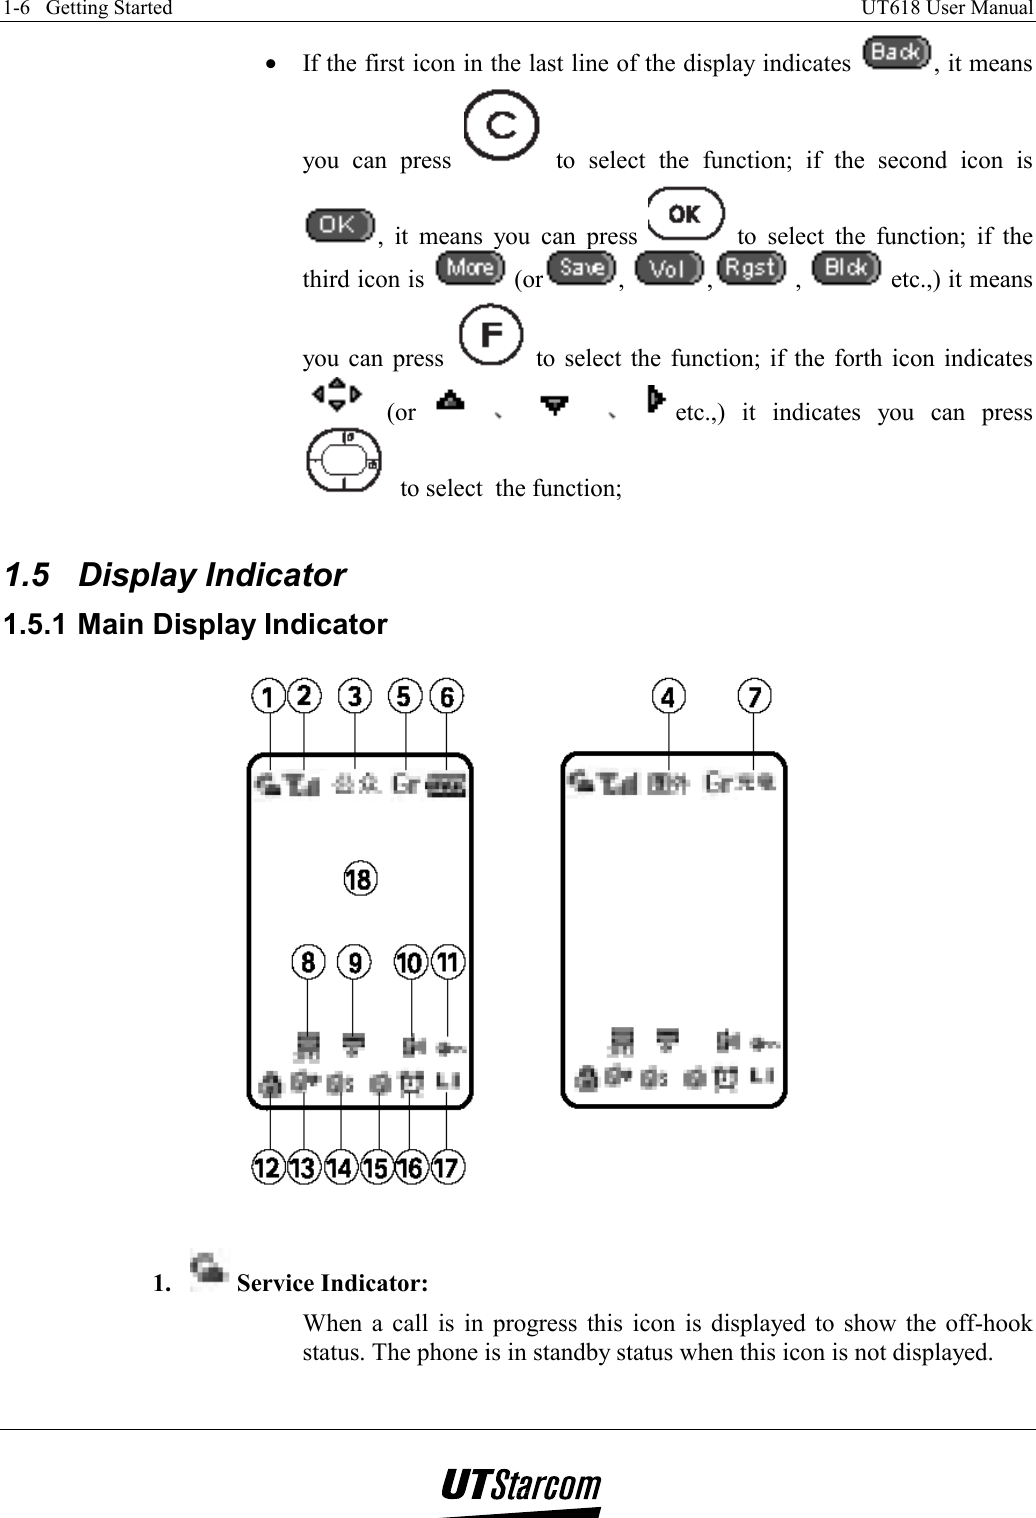 1-6   Getting Started    UT618 User Manual   •  If the first icon in the last line of the display indicates  , it means you can press   to select the function; if the second icon is , it means you can press   to select the function; if the third icon is   (or ,  ,  ,   etc.,) it means you can press   to select the function; if the forth icon indicates  (or  etc.,) it indicates you can press  to select  the function;  1.5 Display Indicator 1.5.1 Main Display Indicator   1.   Service Indicator: When a call is in progress this icon is displayed to show the off-hook status. The phone is in standby status when this icon is not displayed. 